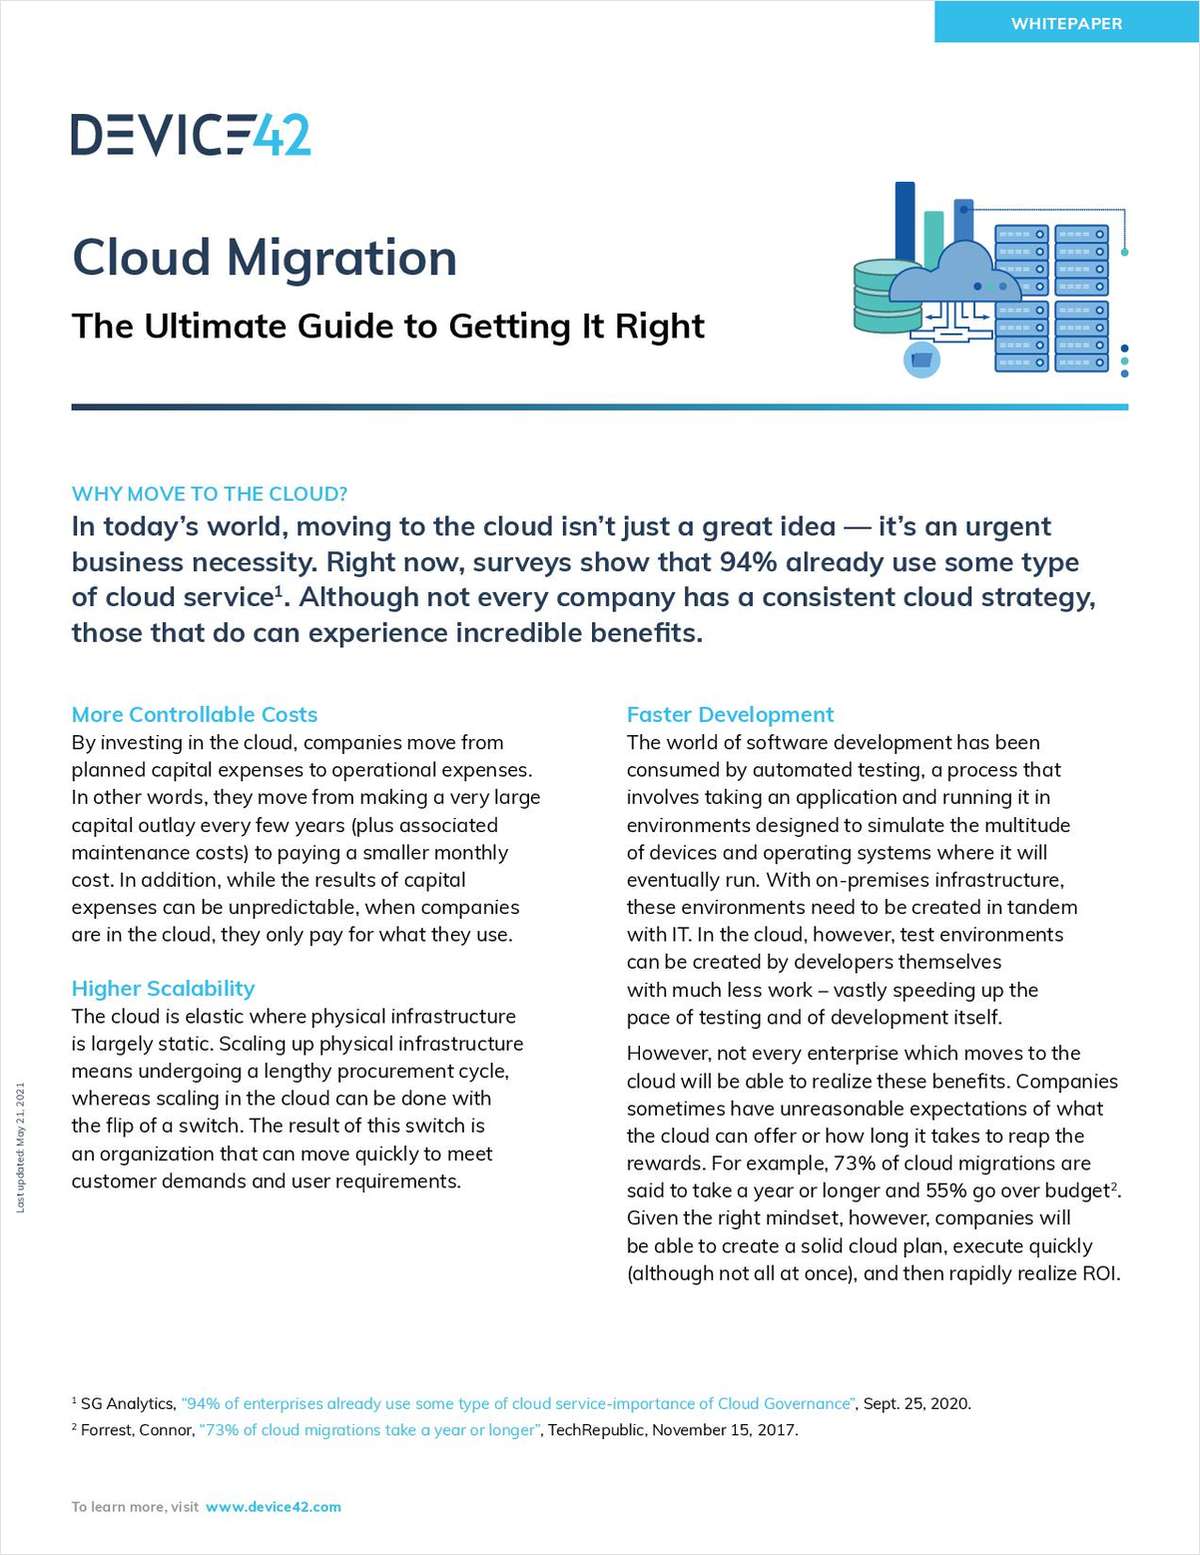 Cloud Migration: The Ultimate Guide to Getting it Right